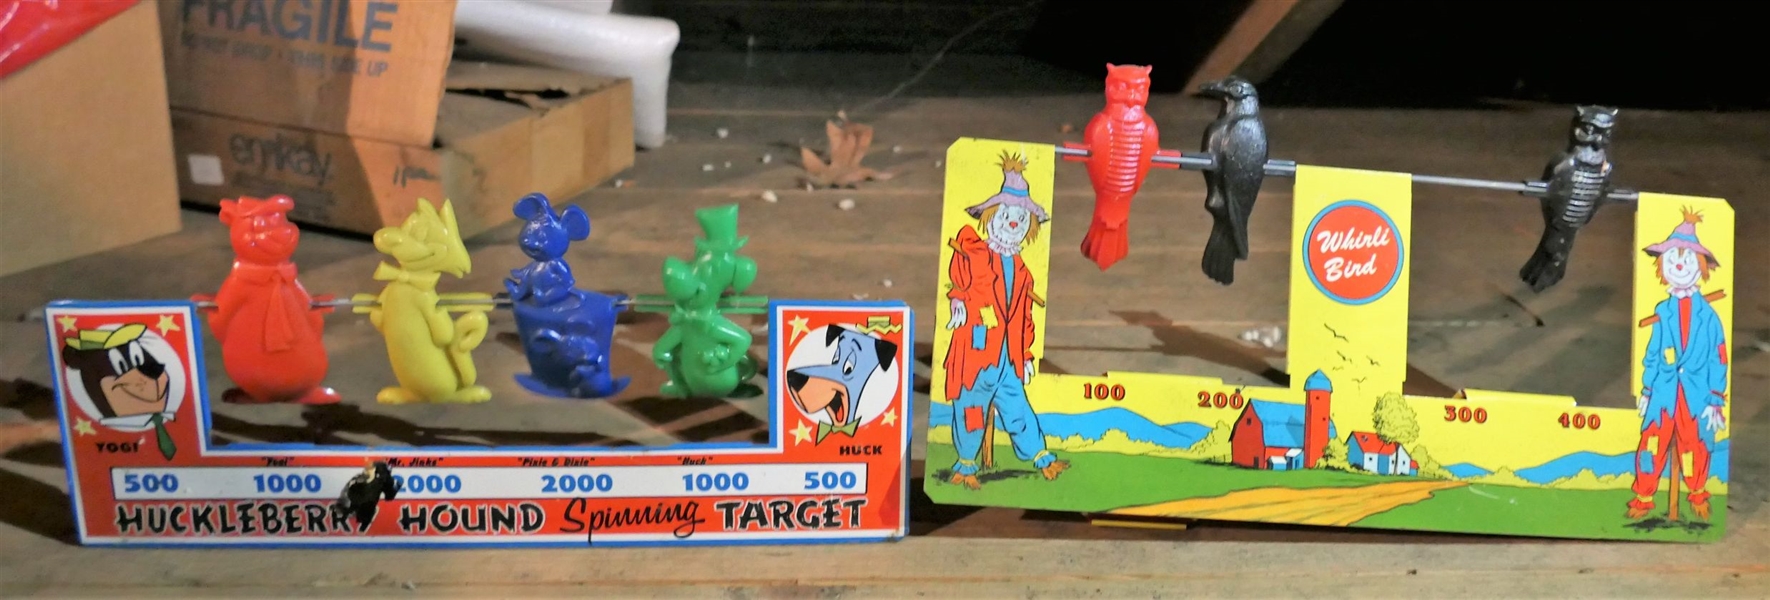 Knickerbocker No.762 1959 - Huckleberry Hound Spinning Target and Ohio Art Whirli Bird Target Game - Both Tin Litho - Hound Has Some Plastic Residue, Not Paint Loss